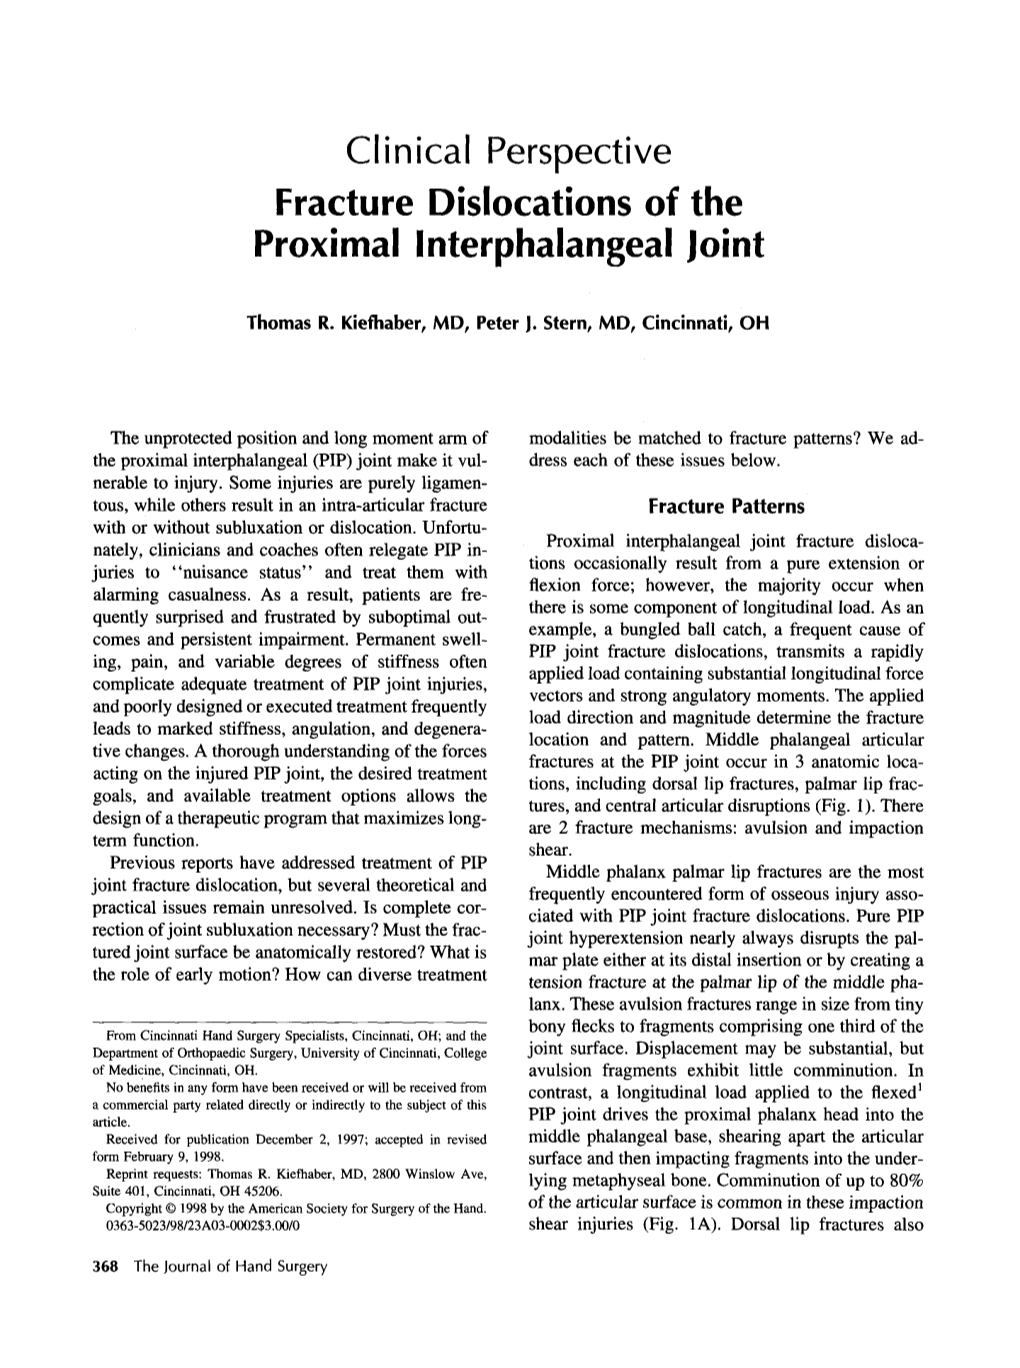 Clinical Perspective Fracture Dislocations of the Proximal Interphalangeal Ioint